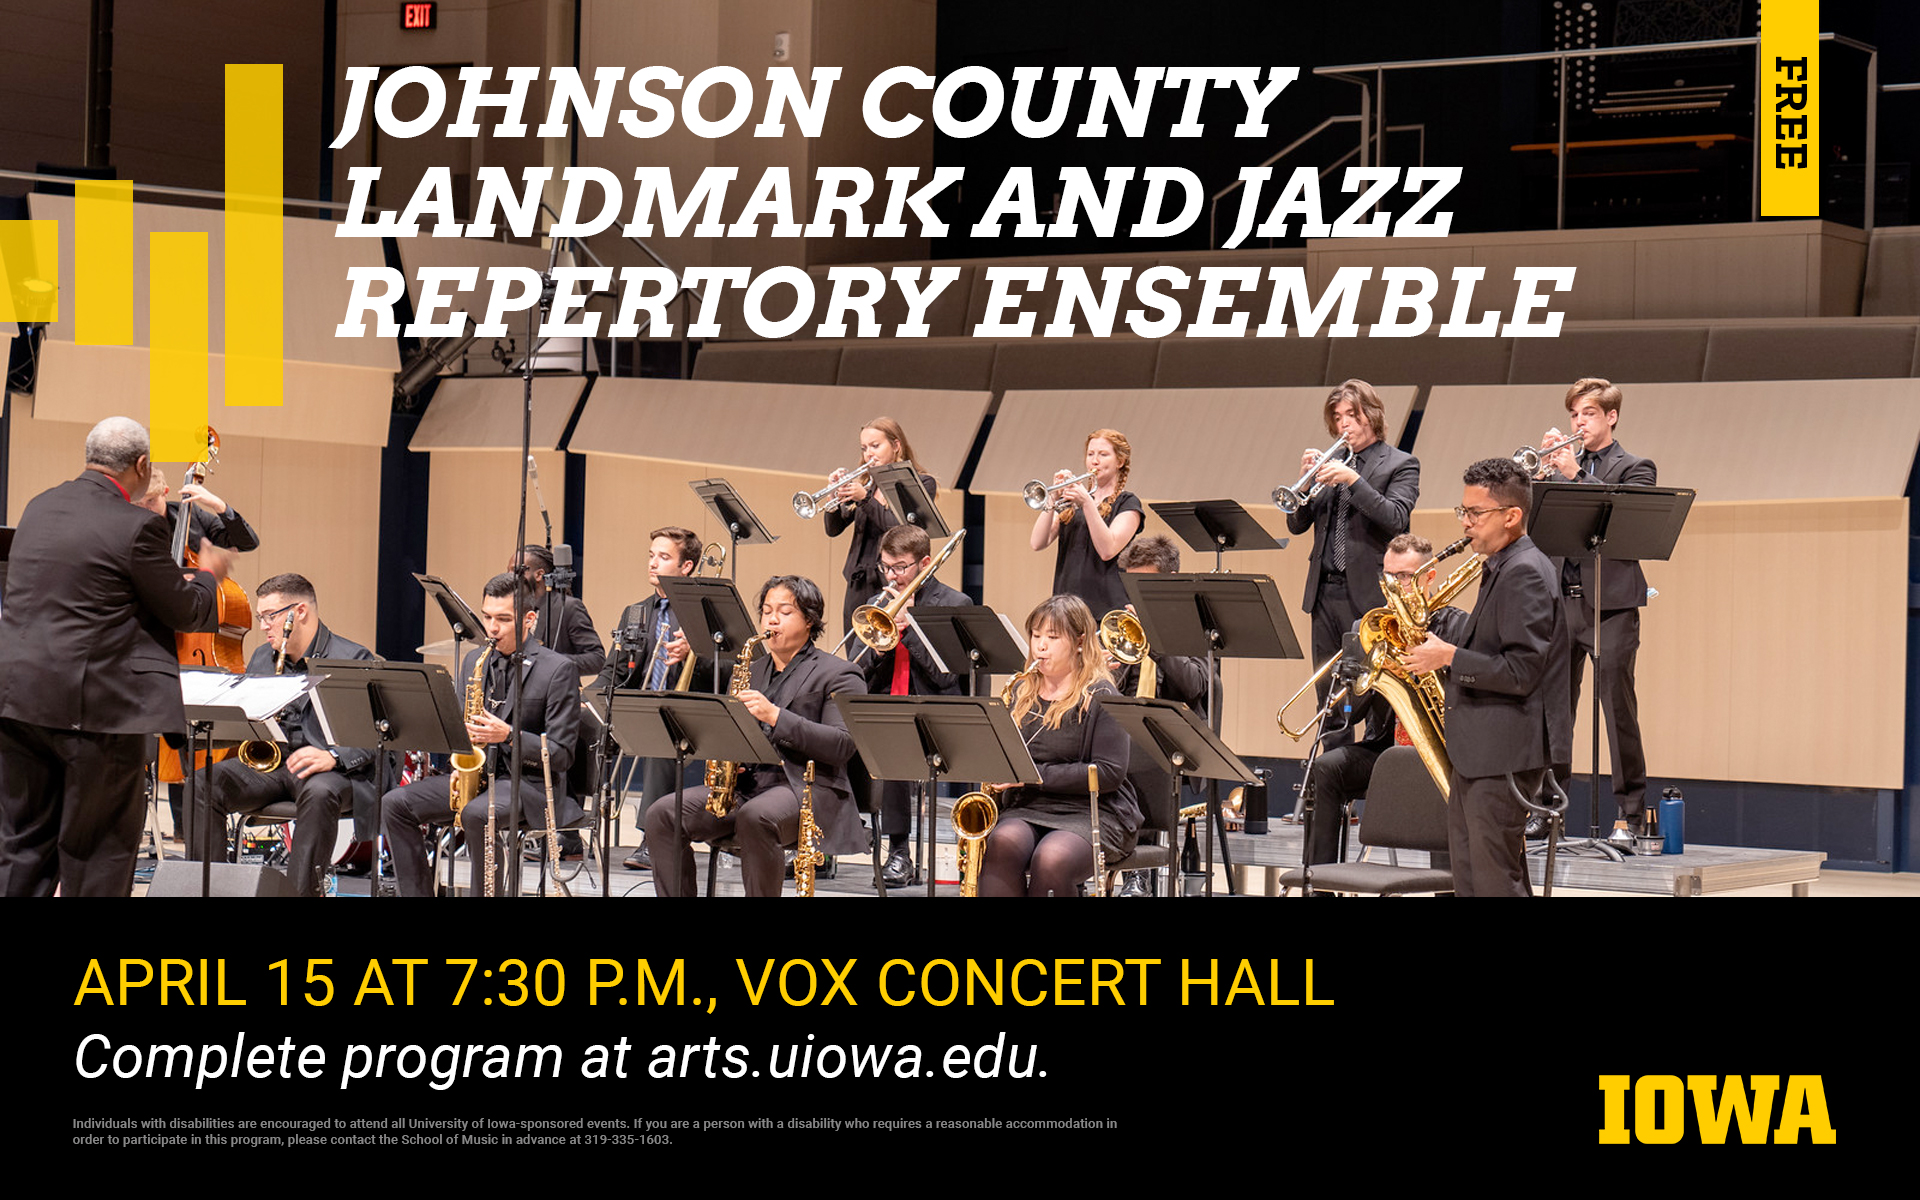 Photo of a jazz ensemble. Johnson County Landmark and Jazz Repertory Ensemble. April 15 at 7:30pm, Vox concert hall. Complete program at arts.uiowa.edu. Individuals with disabilities are encouraged to attend all University of Iowa-sponsored events. If you are a person with a disability who requires a reasonable accommodation in order to participate in this program, please contact the School of Music in advance.